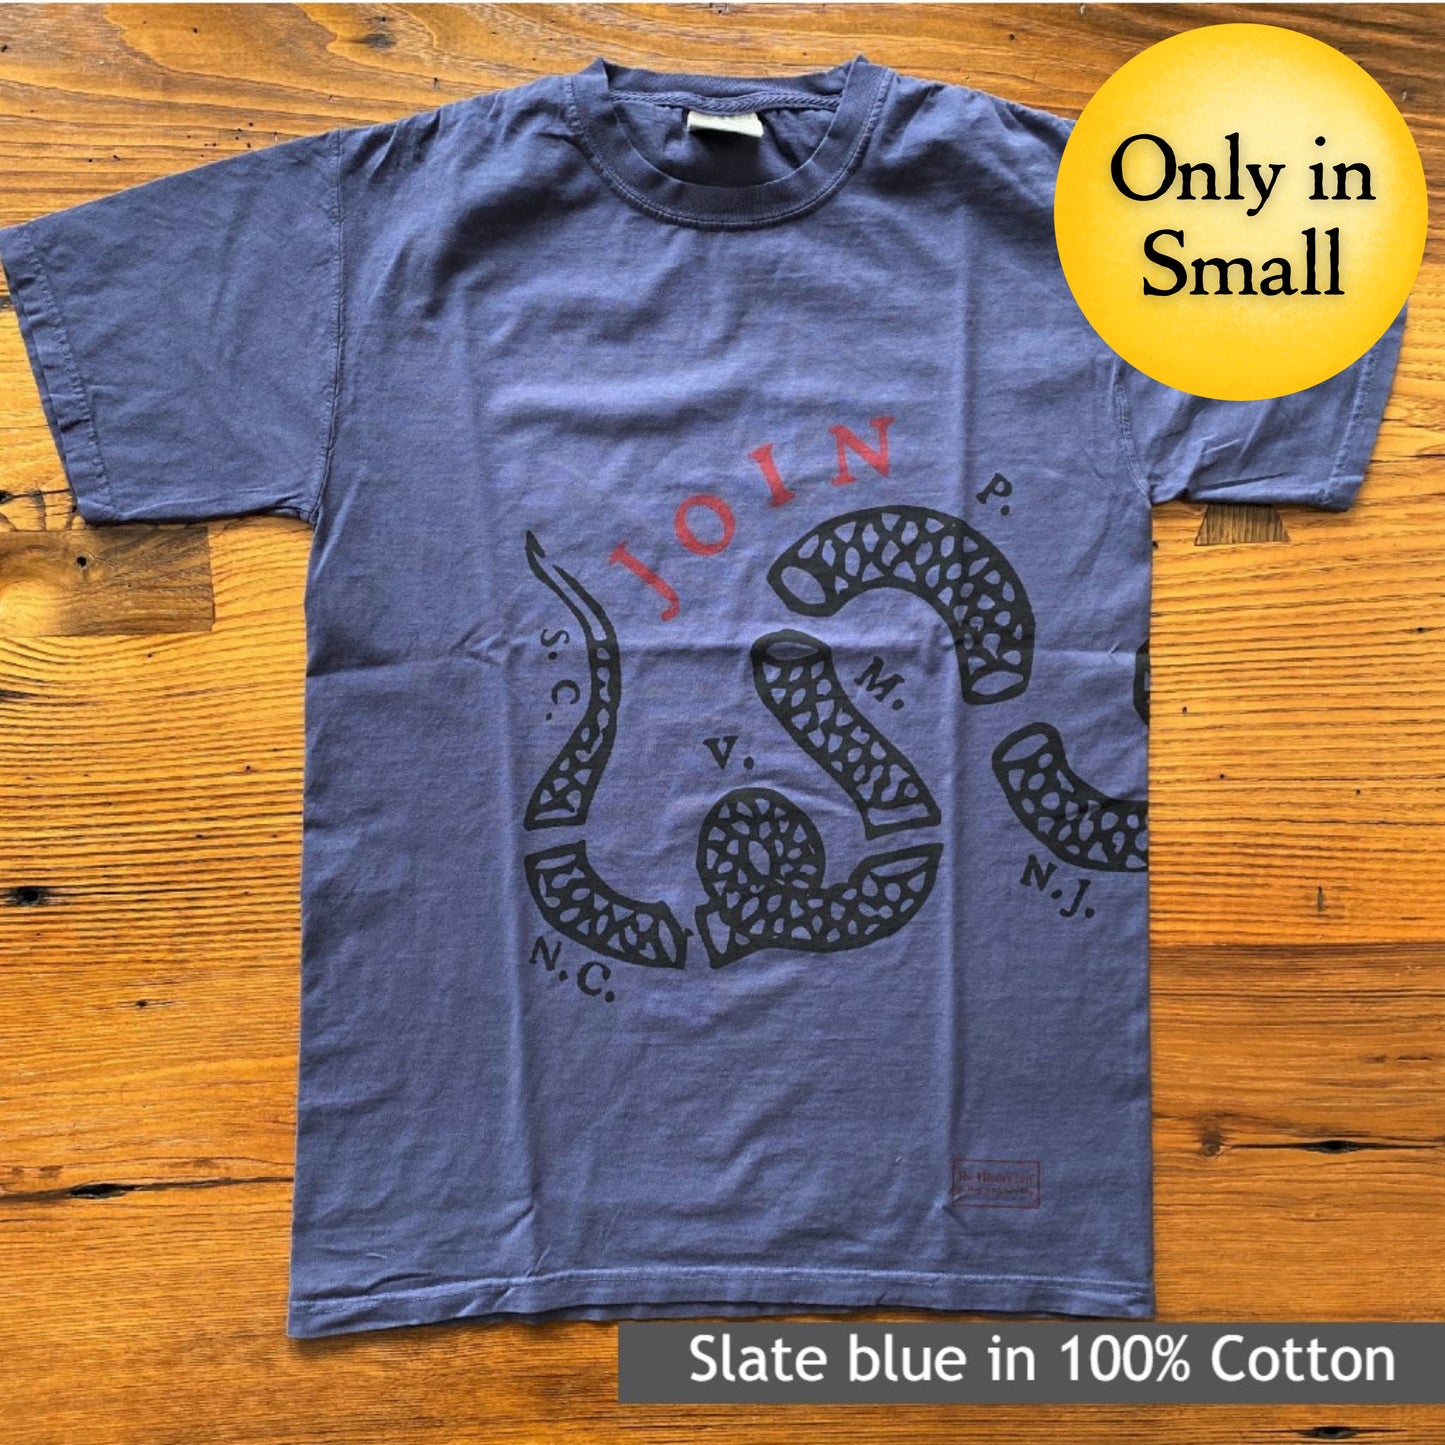 "Join or Die" Shirt